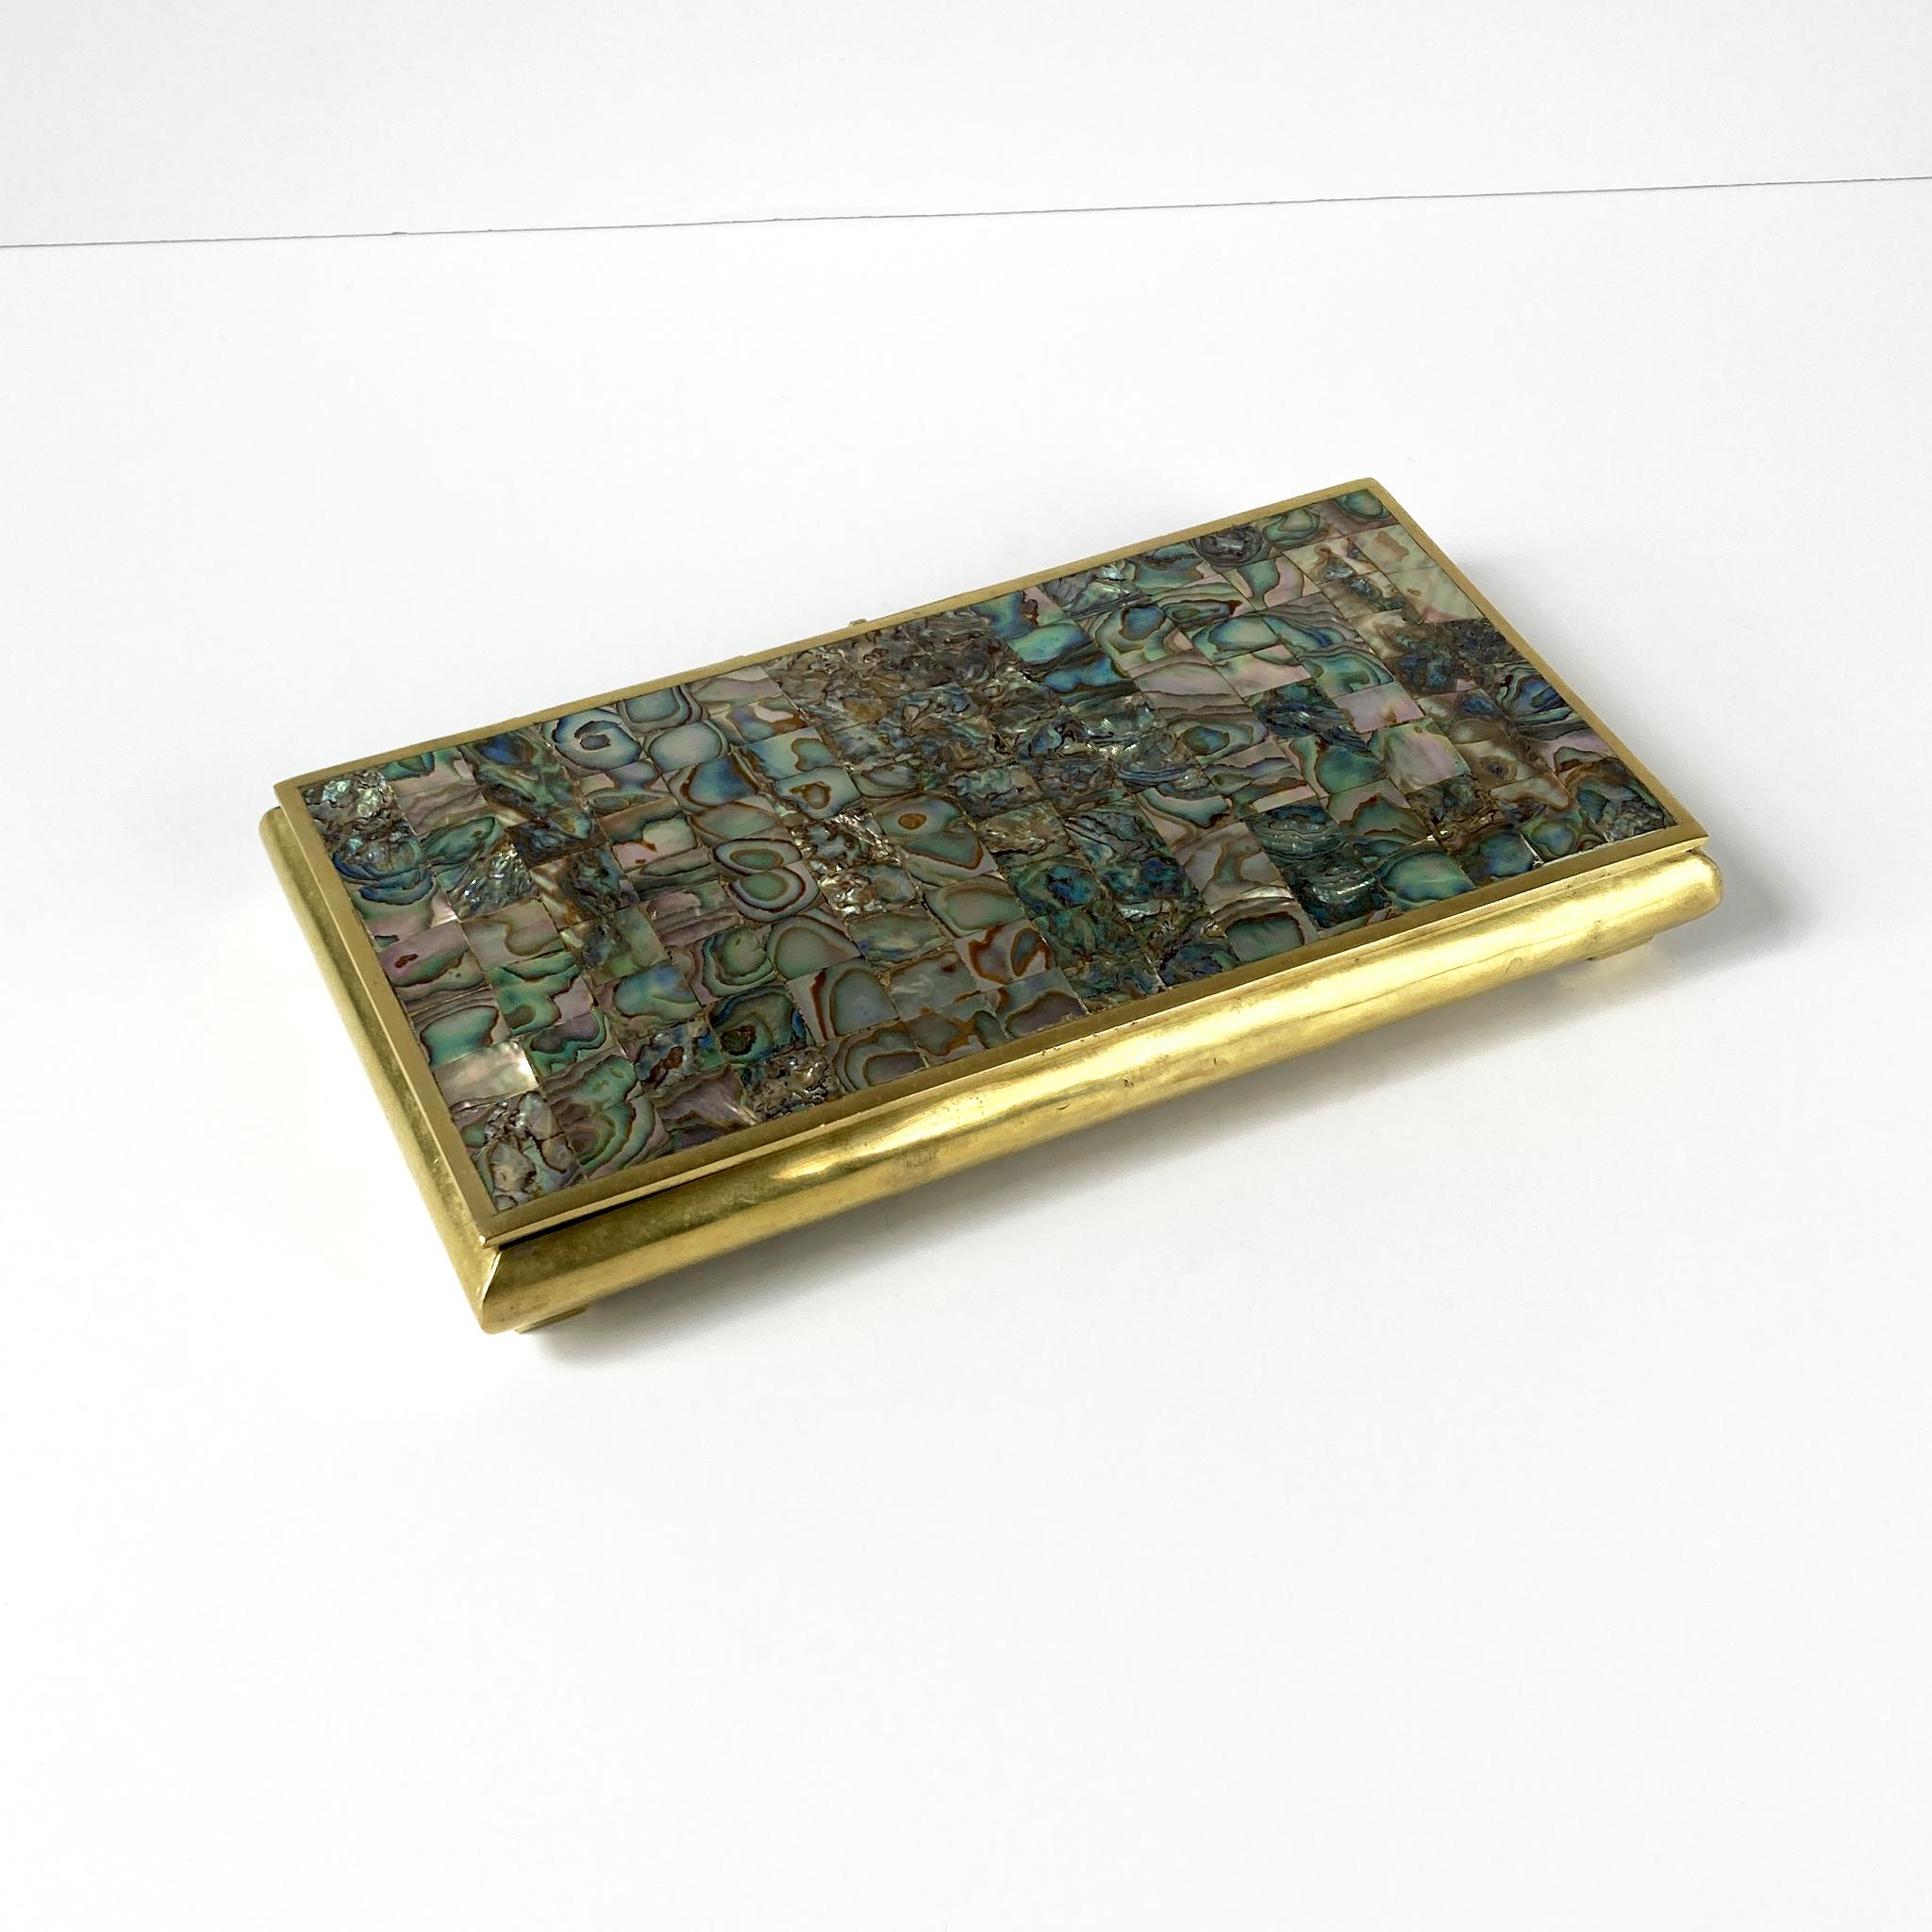 Beautiful hinged brass box with abalone mosaic on lid, wood-lined. The pattern of the mosaic contrasts beautifully with the brass; the iridescence of the abalone is luminous in shades of green, tan and pink. This piece looks great as part of a